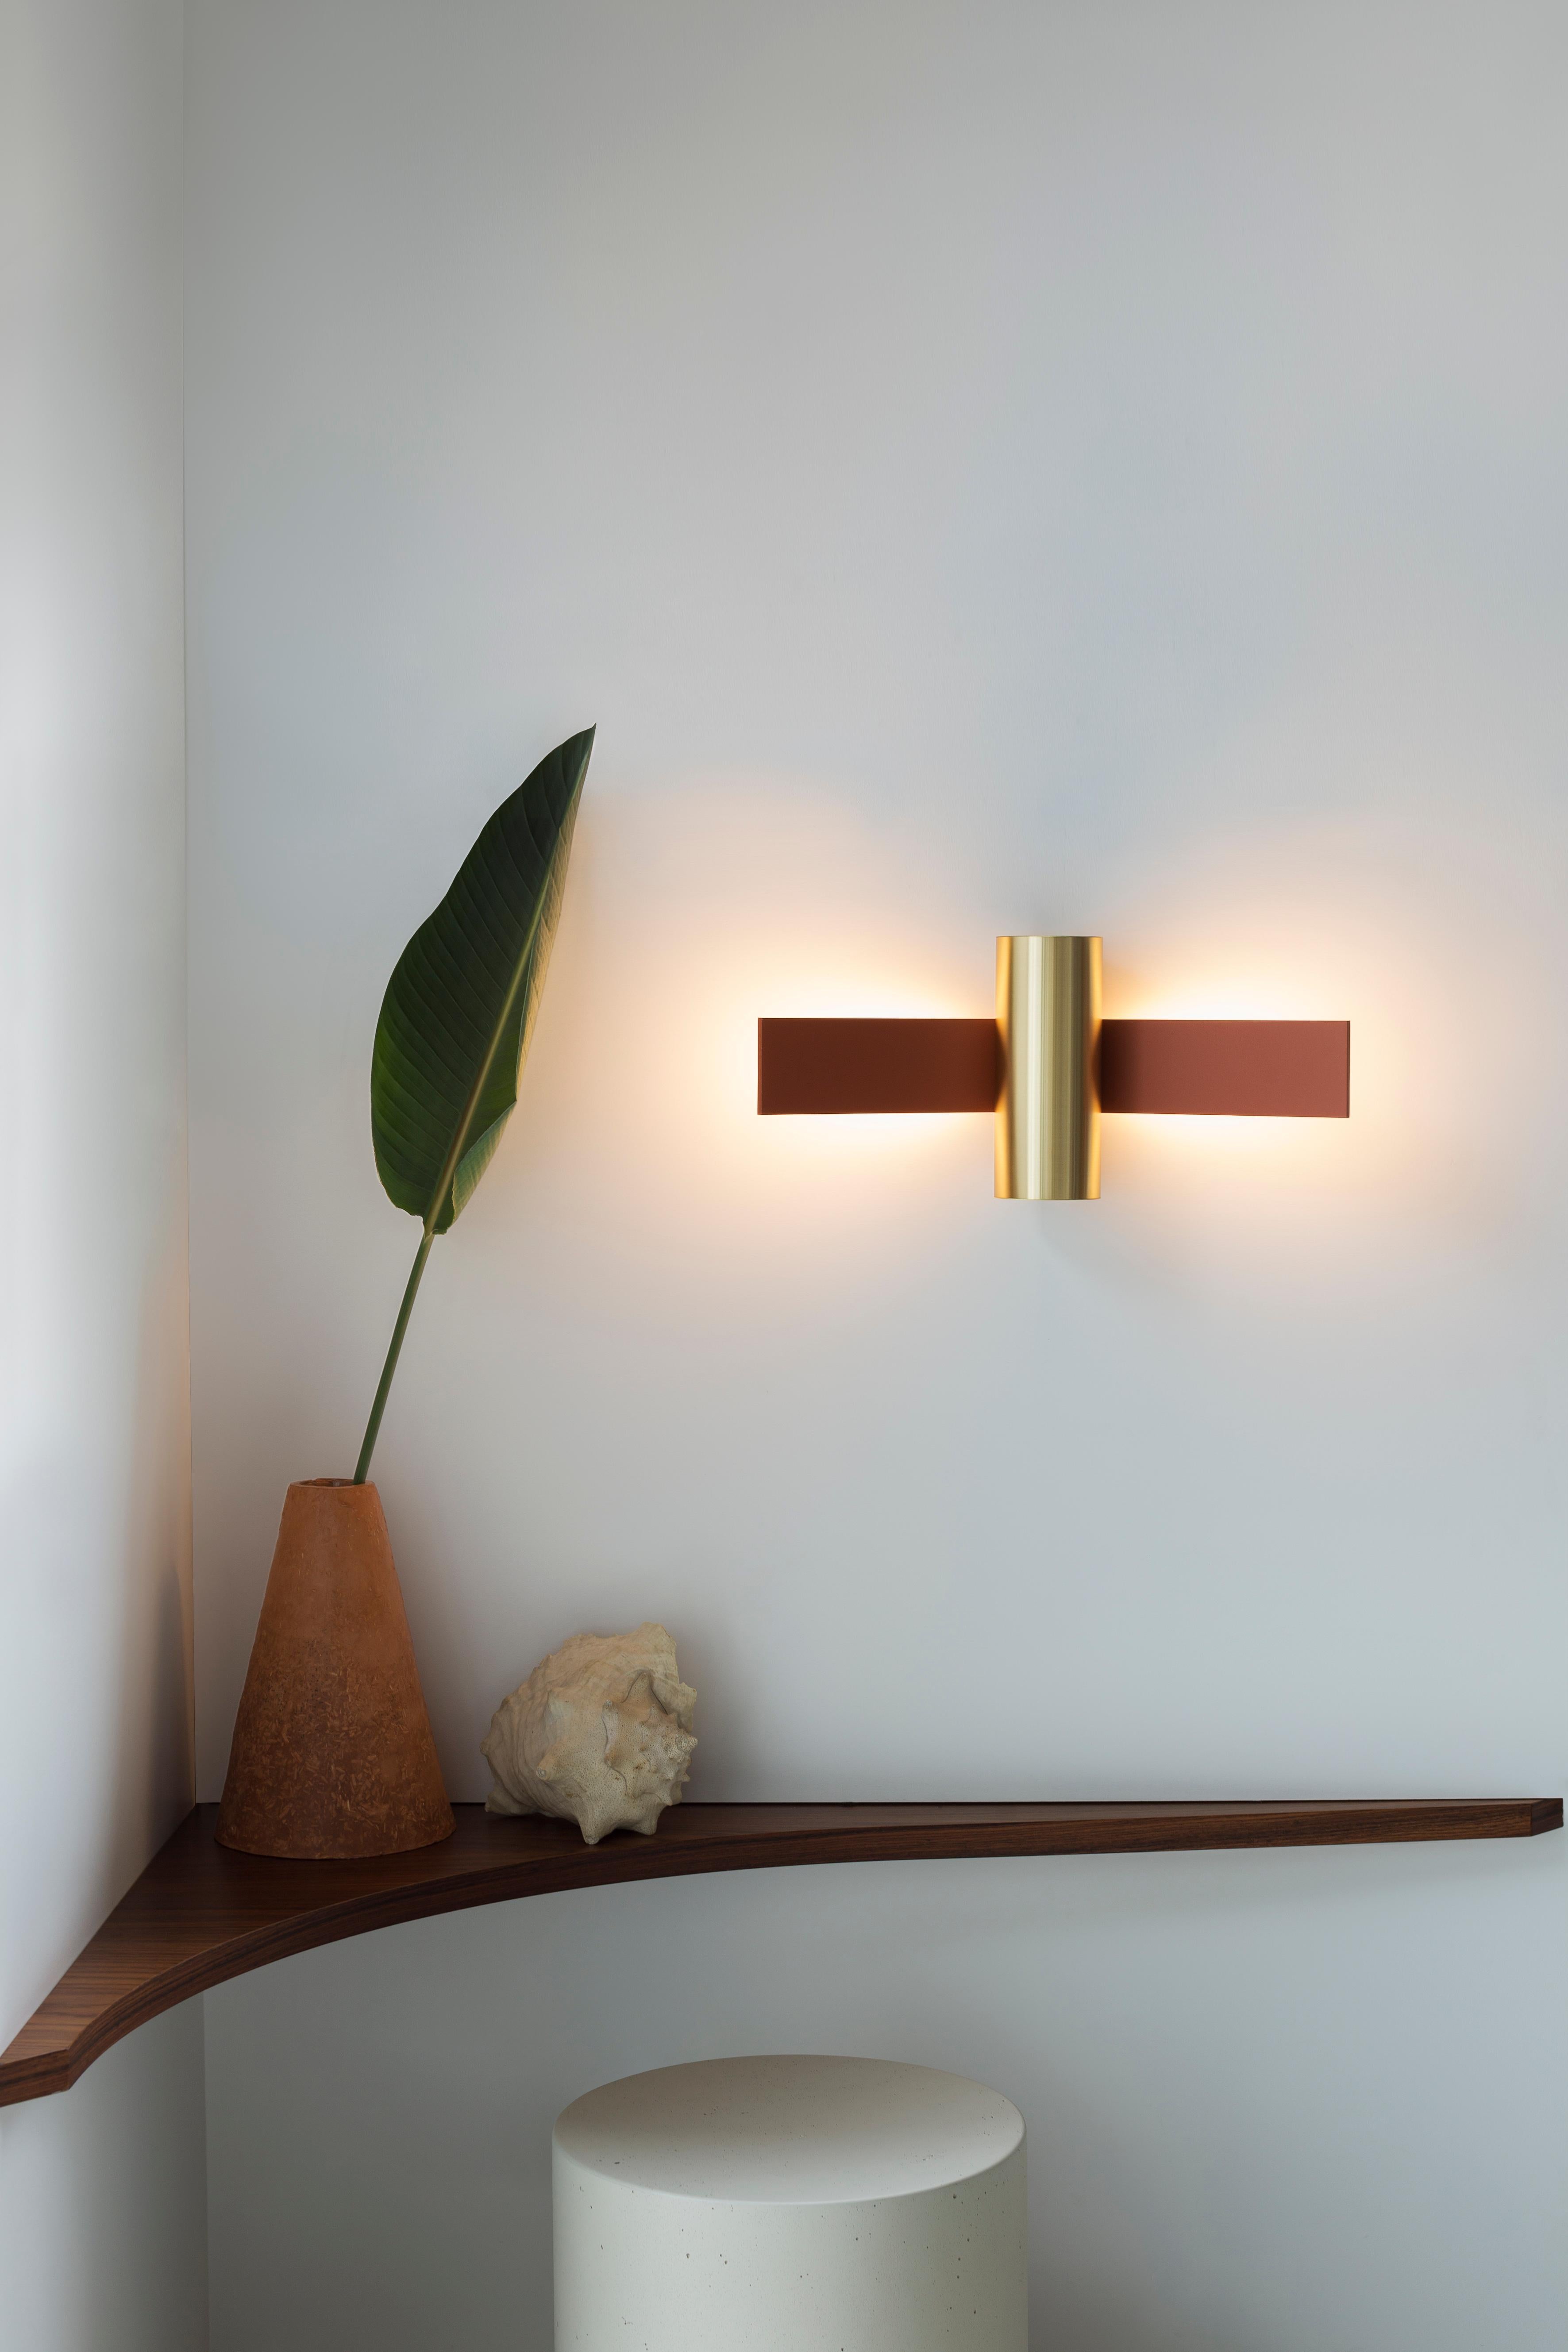 Contemporary Modern Wall Lamp 'Nastro 563.43' by Studiopepe x Tooy, Black & Brushed Brass For Sale